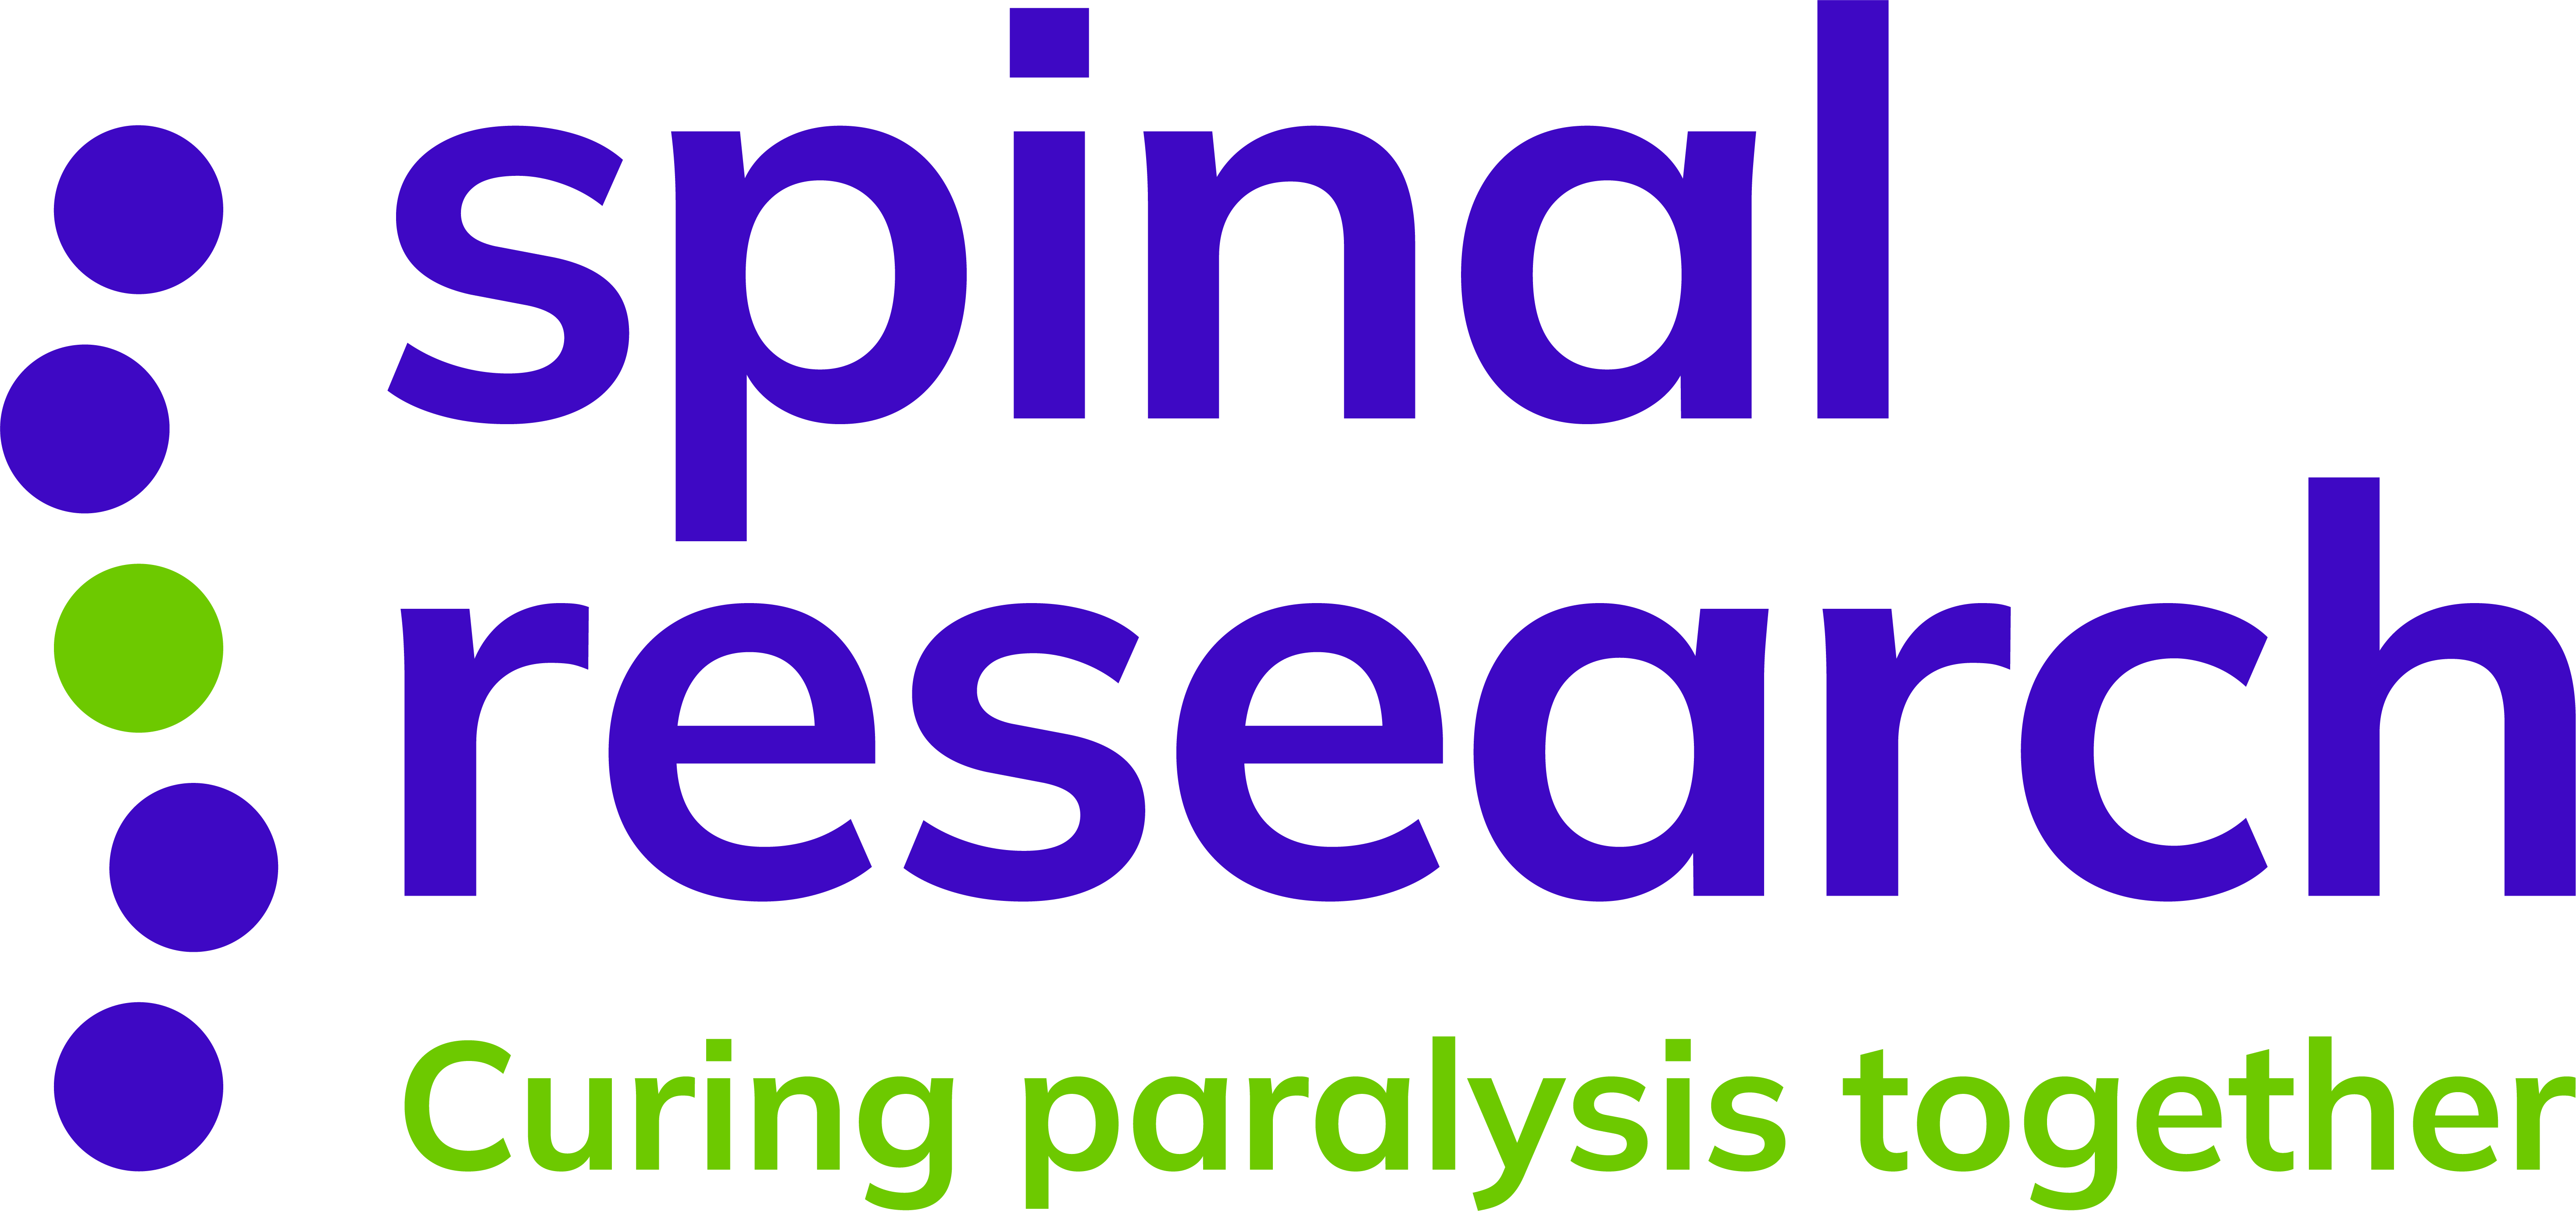 Spinal Research